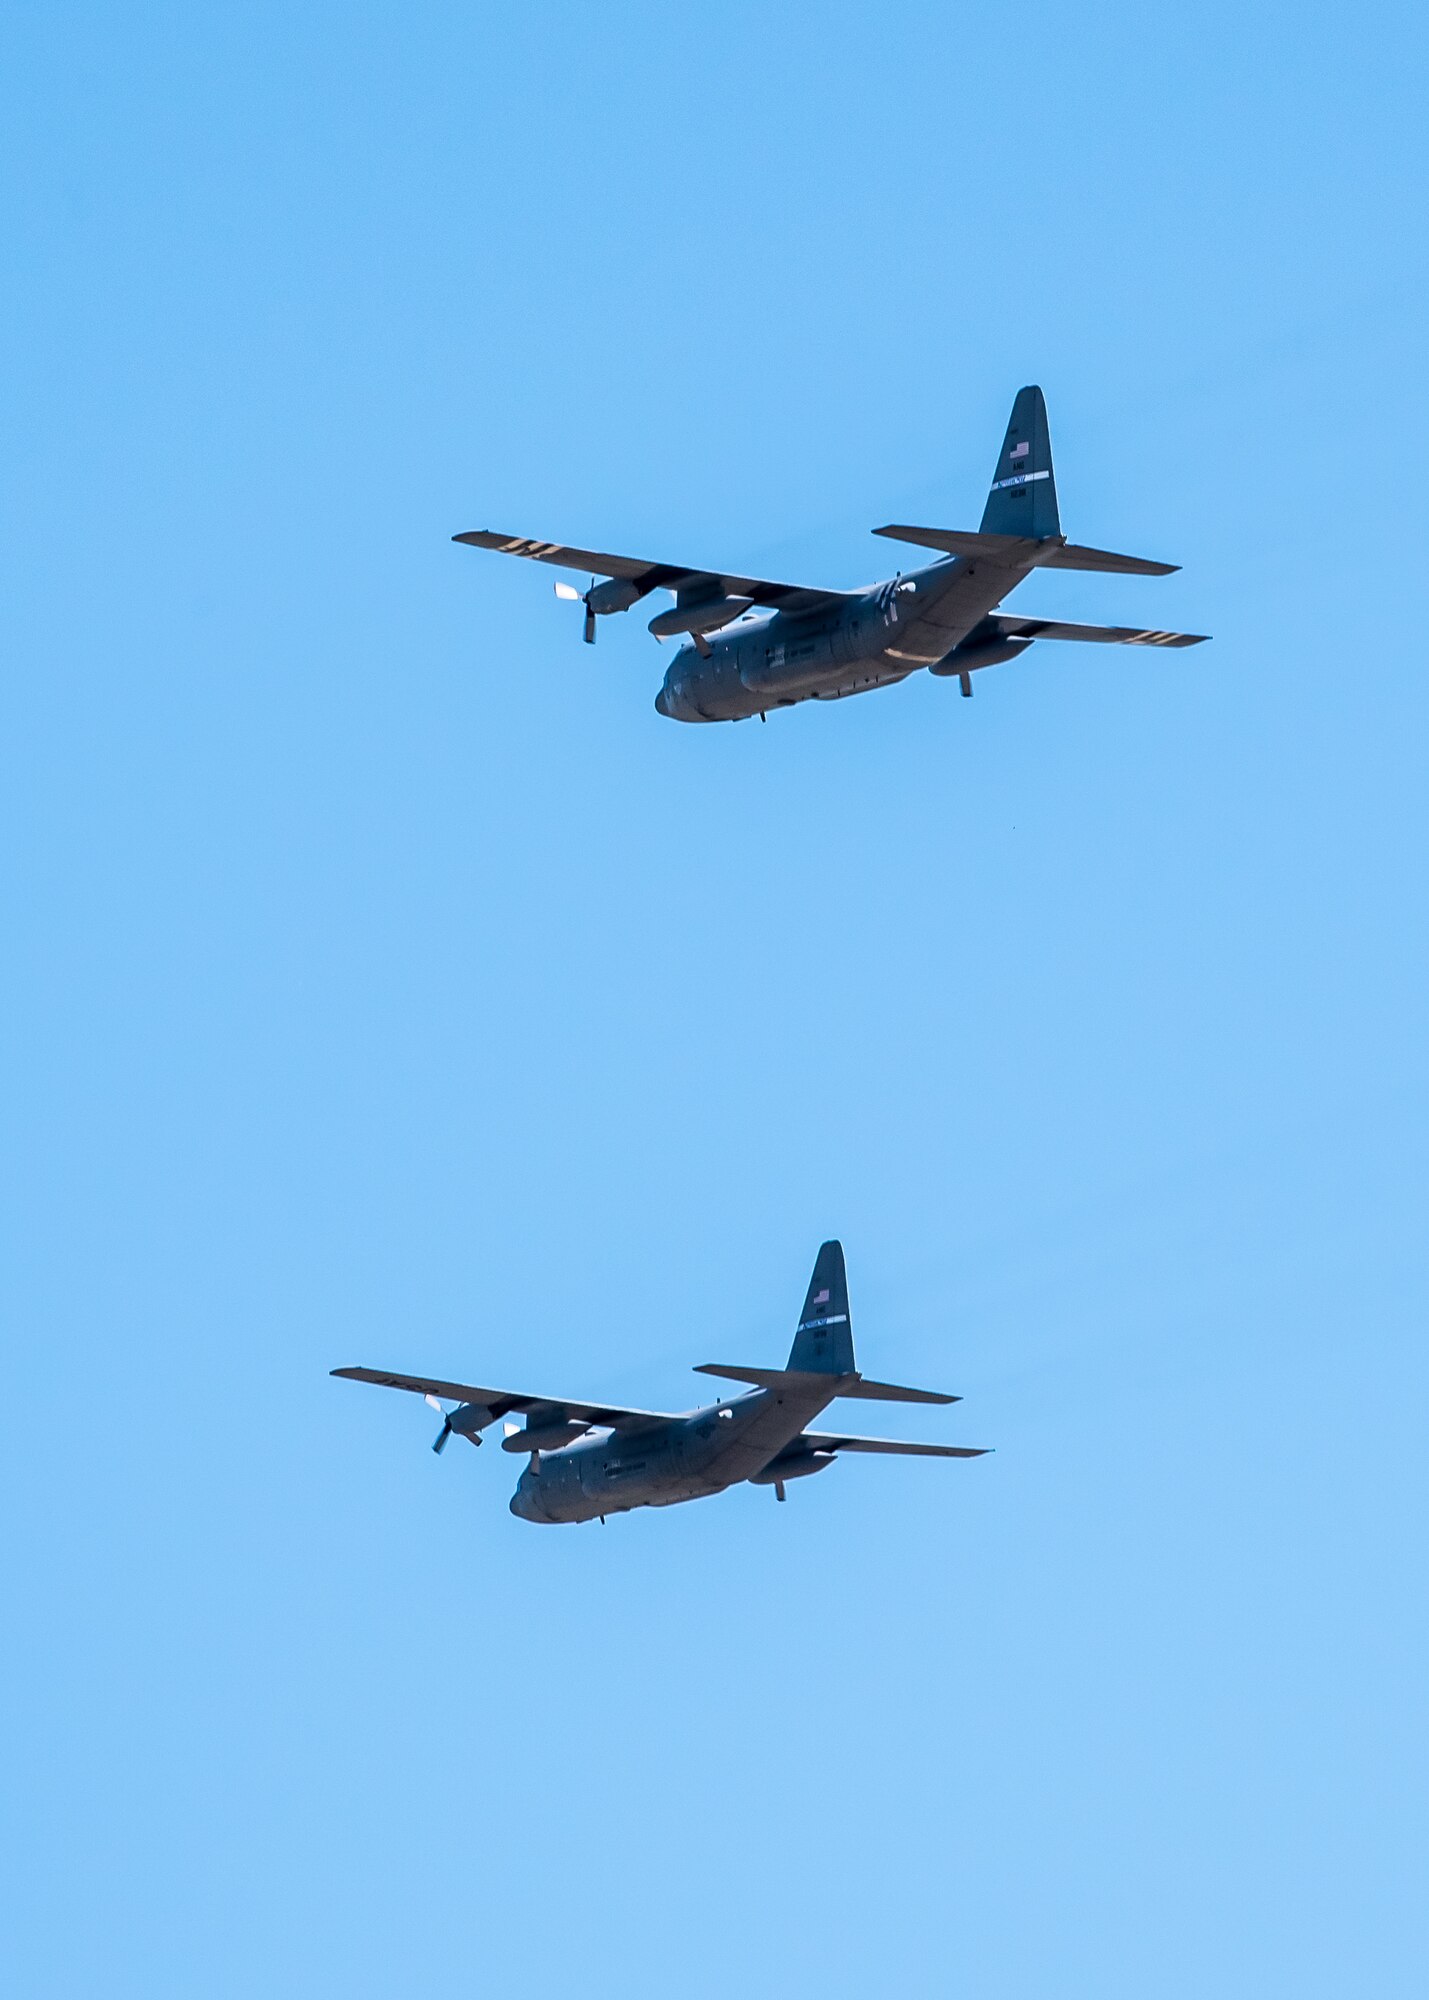 Two Kentucky Air National Guard C-130 Hercules aircraft from the 123rd Airlift Wing fly over Louisville, Ky., May 1, 2020, as part of Operation American Resolve, a nationwide salute to all those supporting COVID-19 response efforts. The operation is intended to lift morale during a time of severe health and economic impacts that have resulted from COVID-19. (U.S. Air National Guard photo by Senior Airman Chloe Ochs)